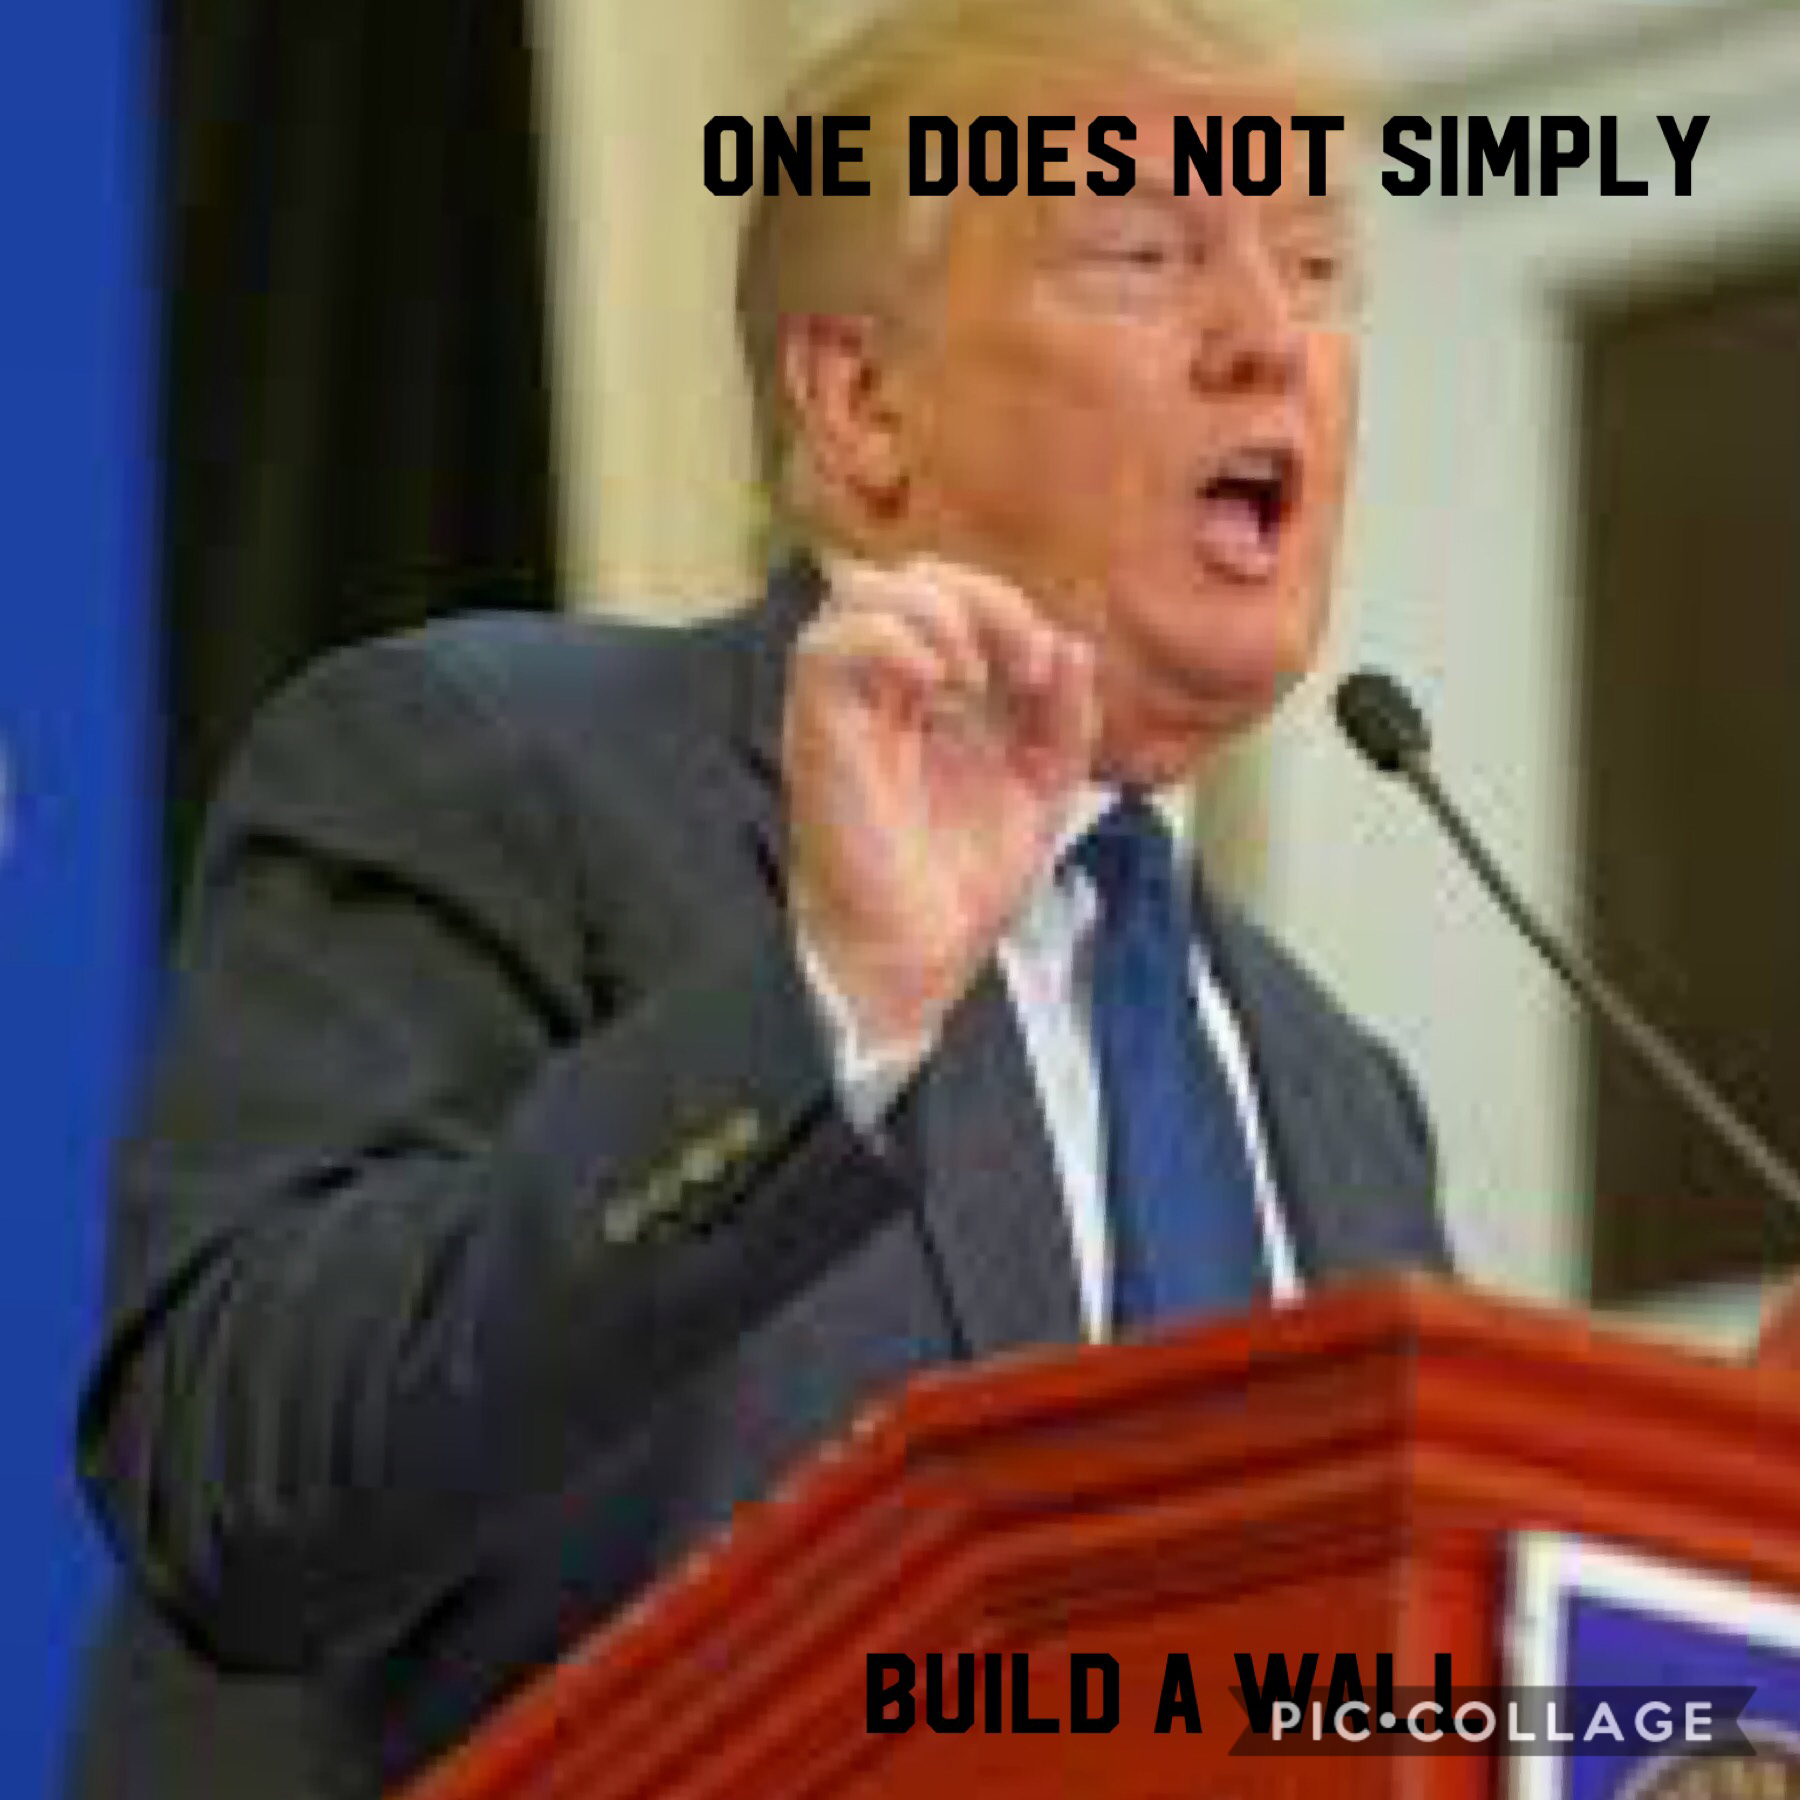 One does not simply build a wall